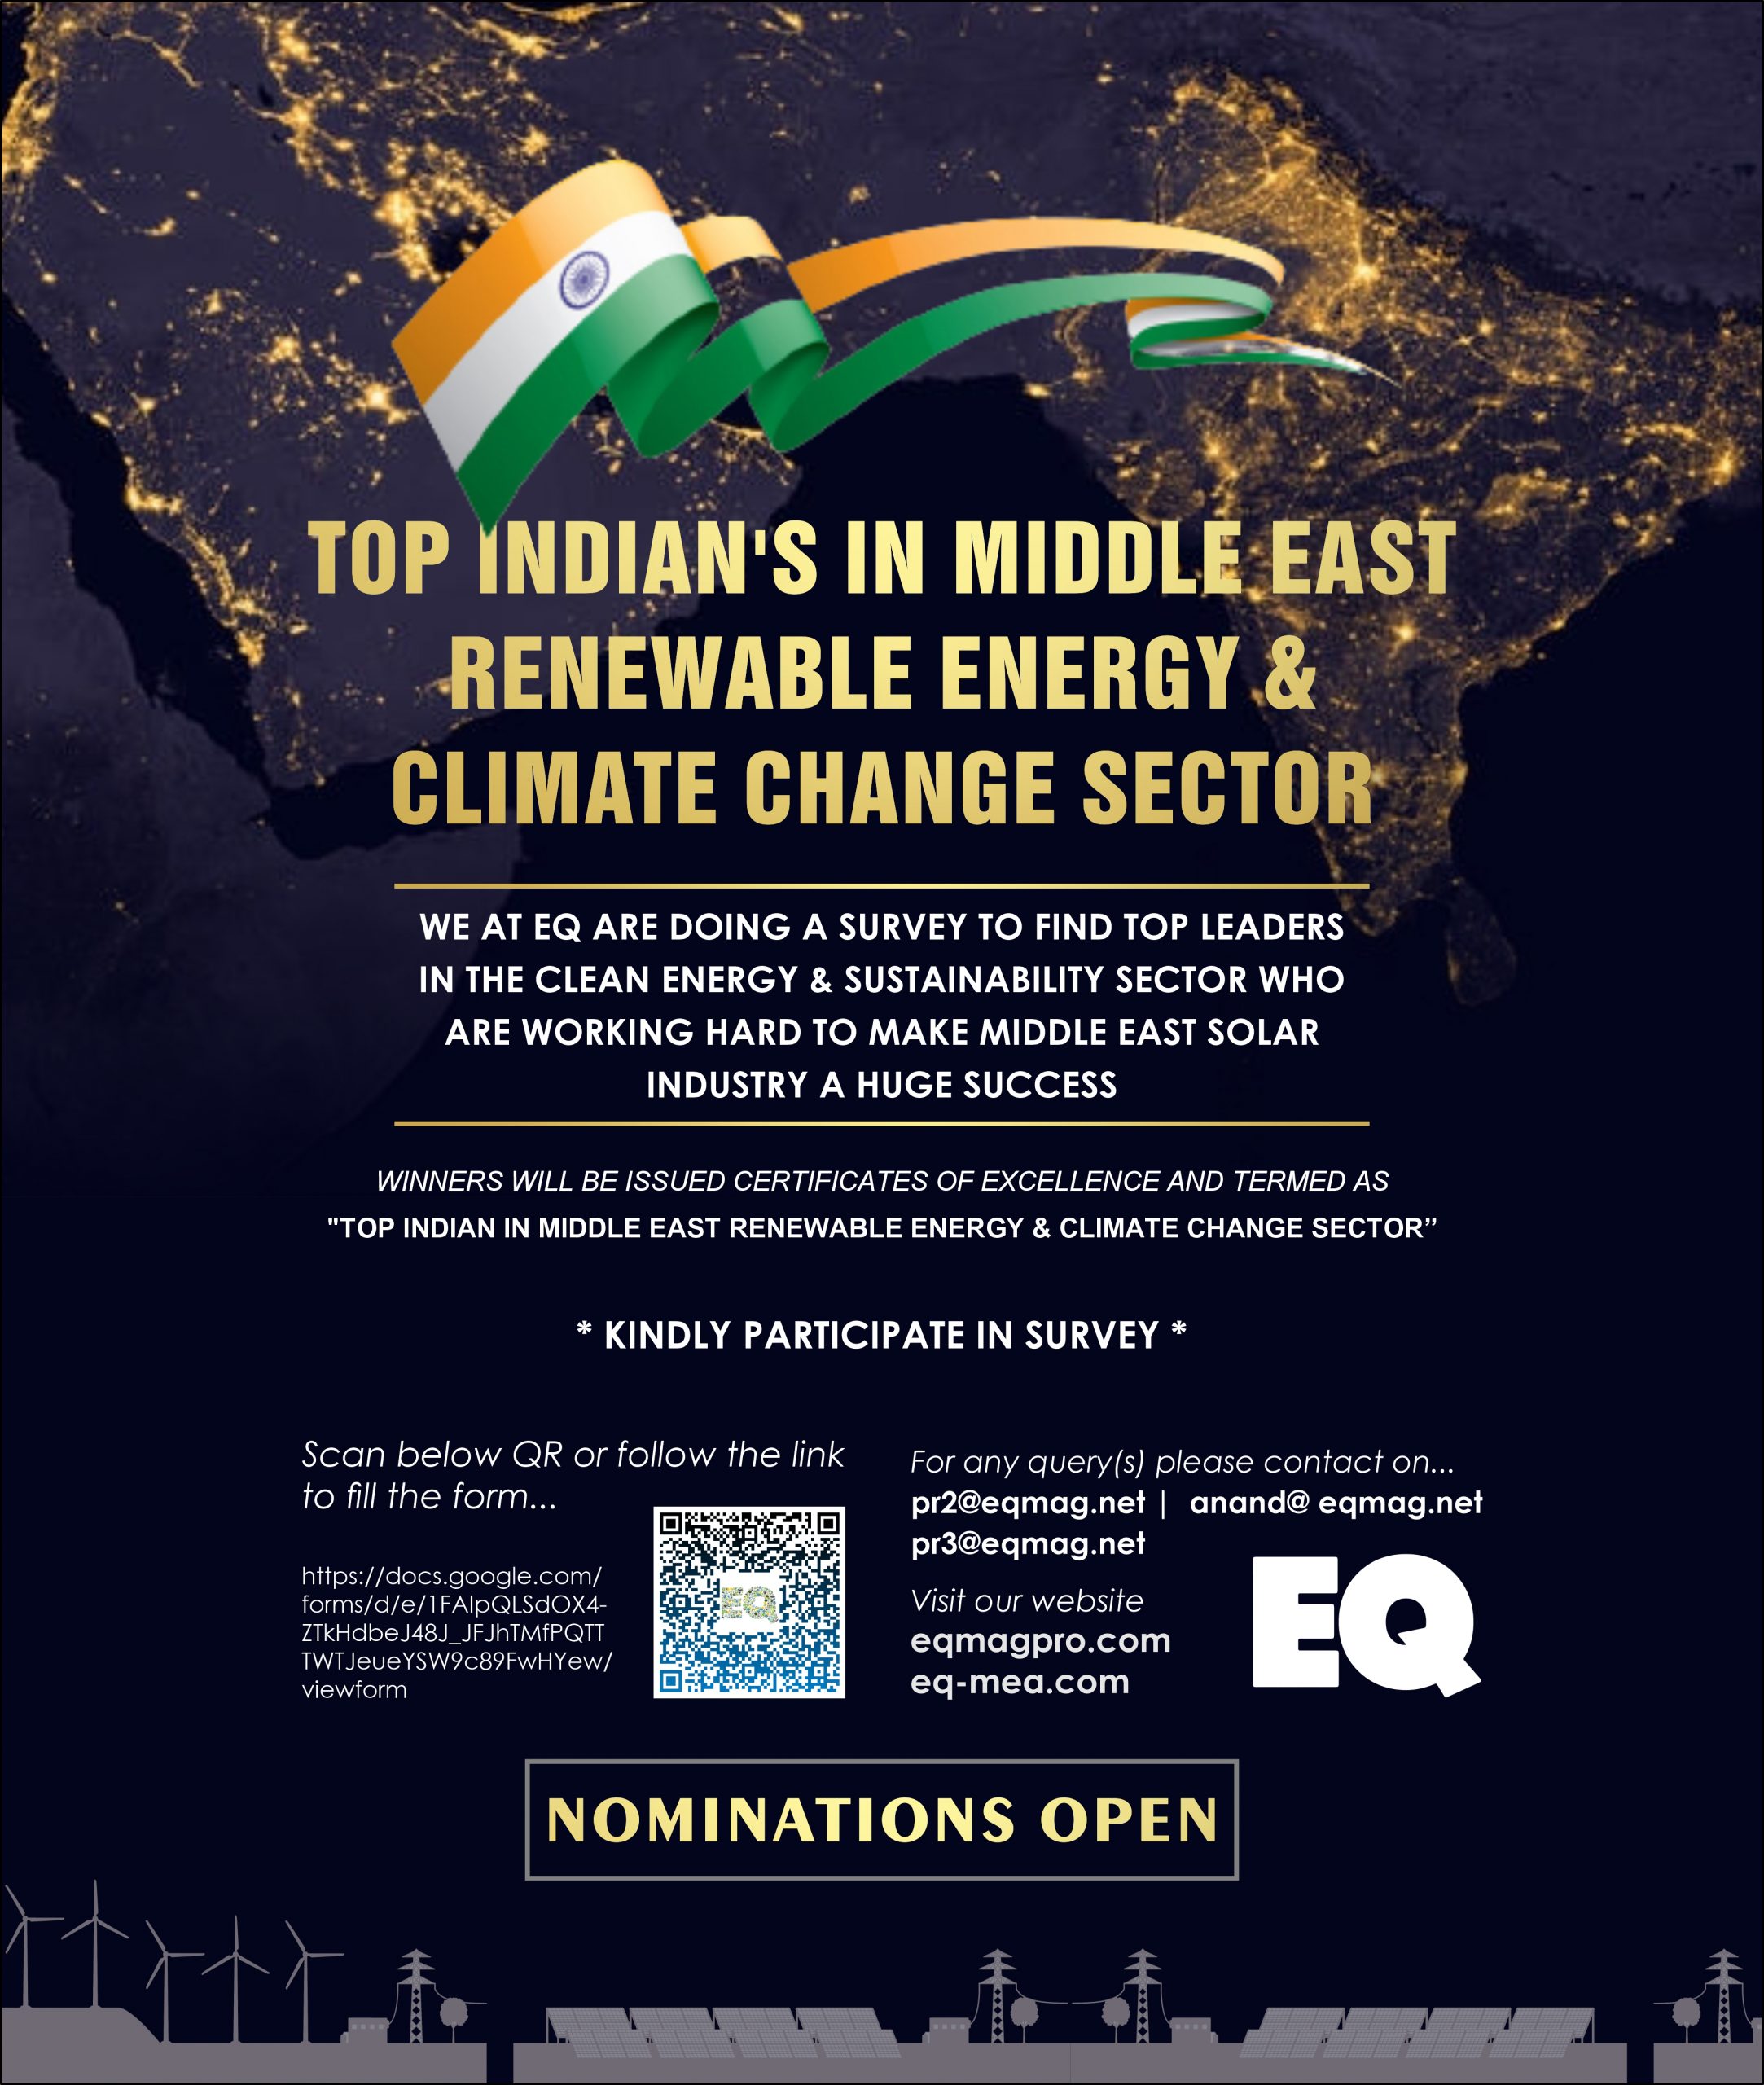 Top Indian’s in Middle East Renewable Energy & Climate Change Sector